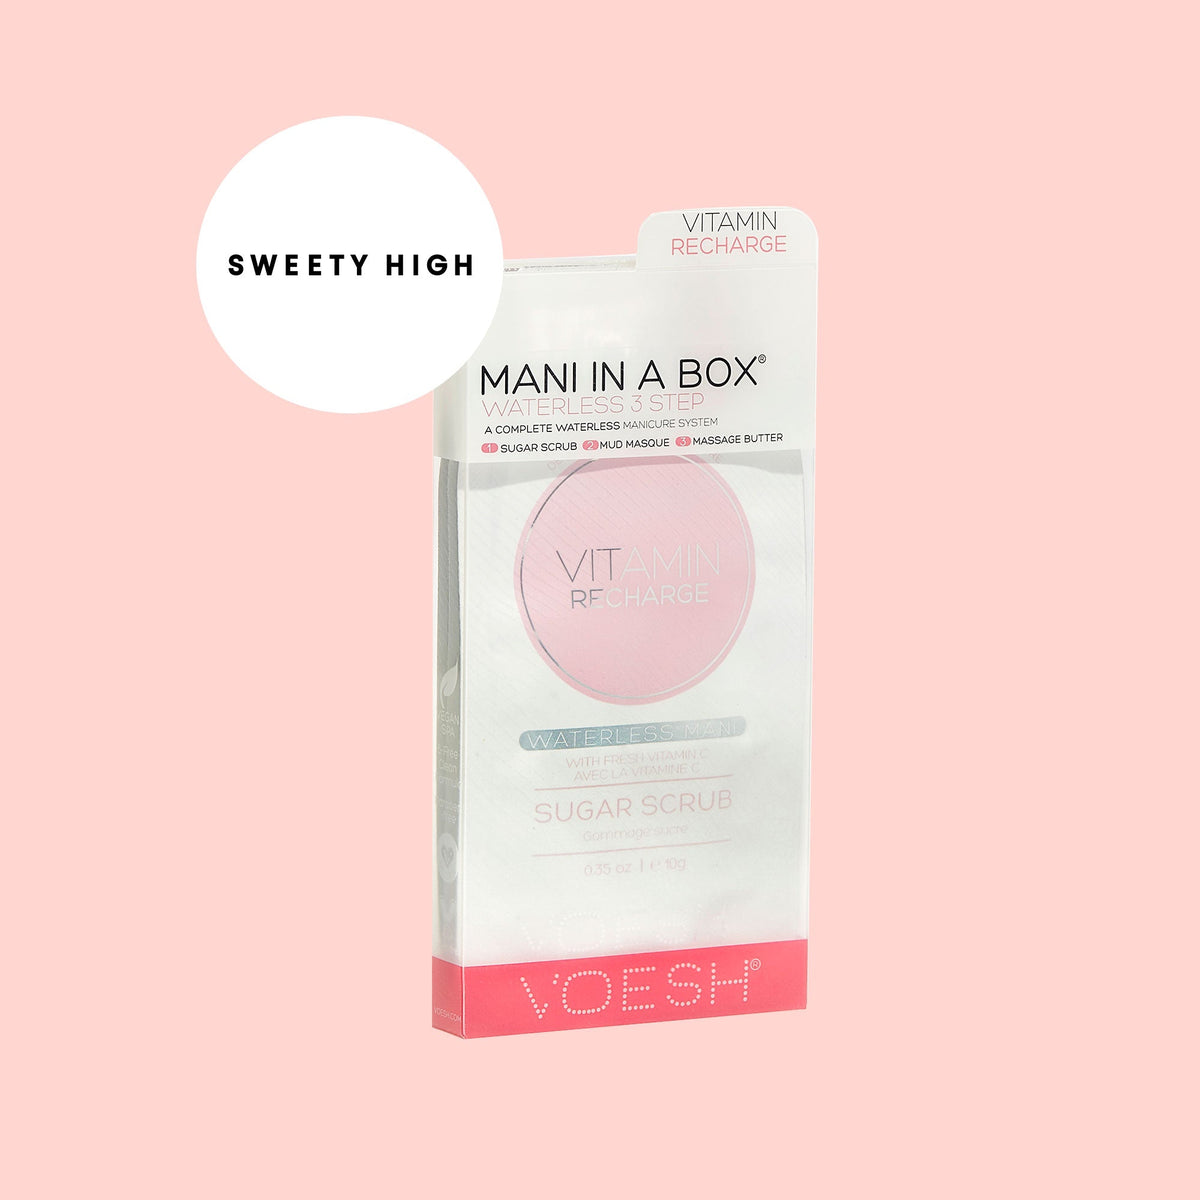 In The Press: VOESH Vitamin Recharge Mani in a Box Featured in Sweety High